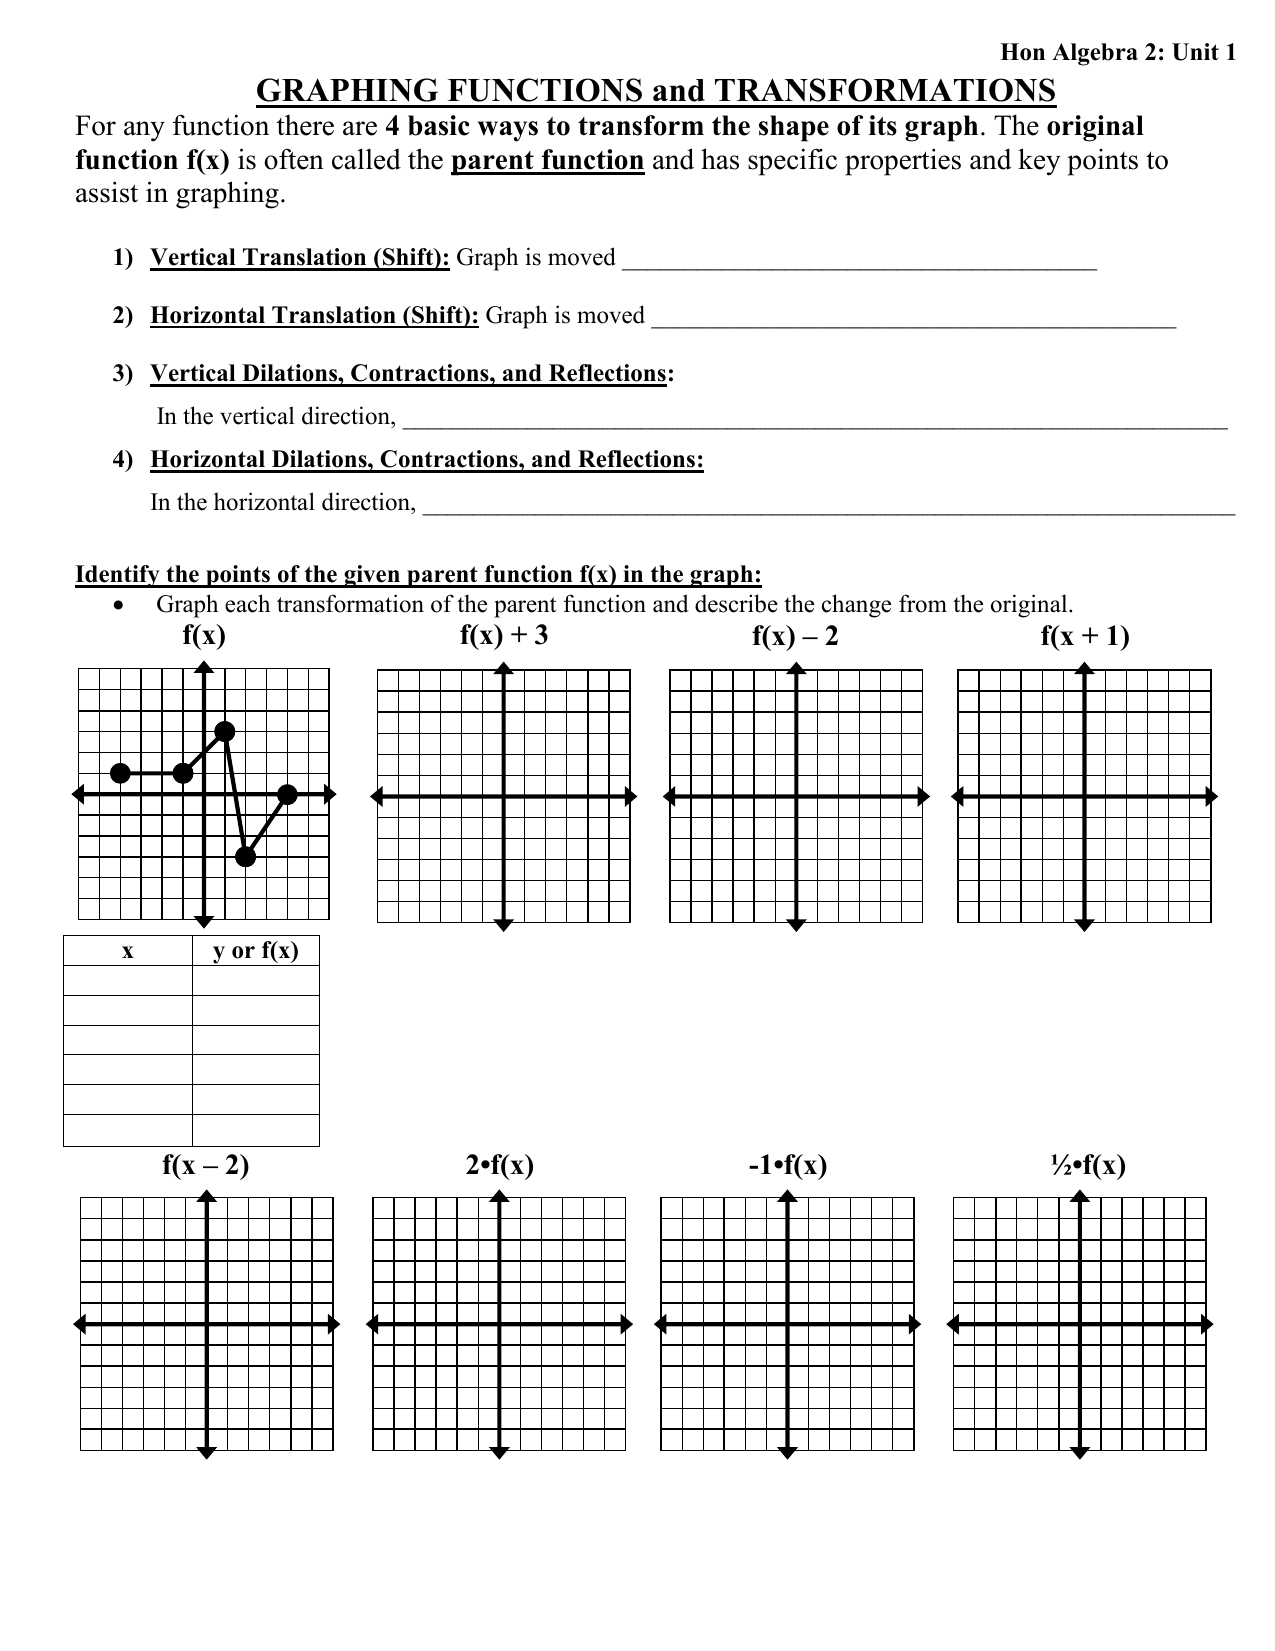 Hon Algebra 22: Unit 22 GRAPHING FUNCTIONS and Regarding Transformations Of Functions Worksheet Answers